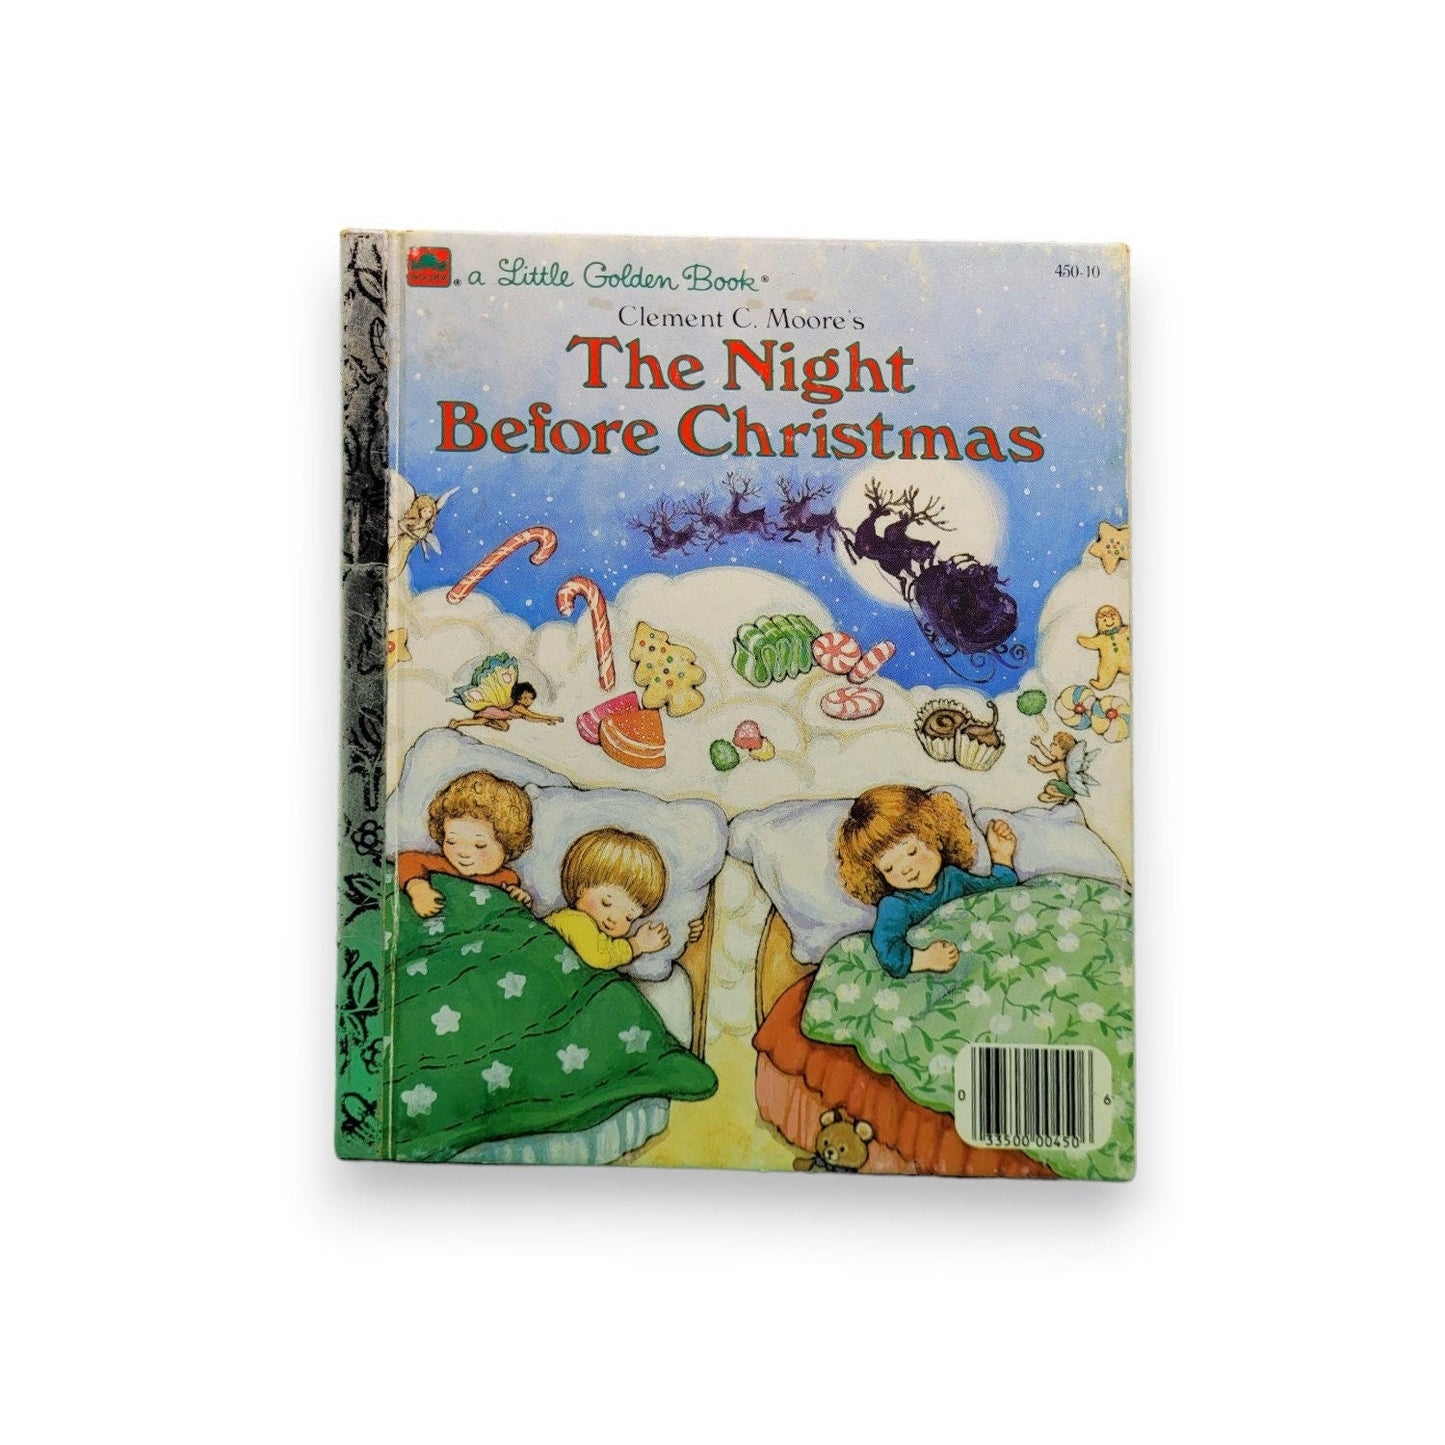 The Night Before Christmas by Clement C. Moore (A Golden Book) 1987